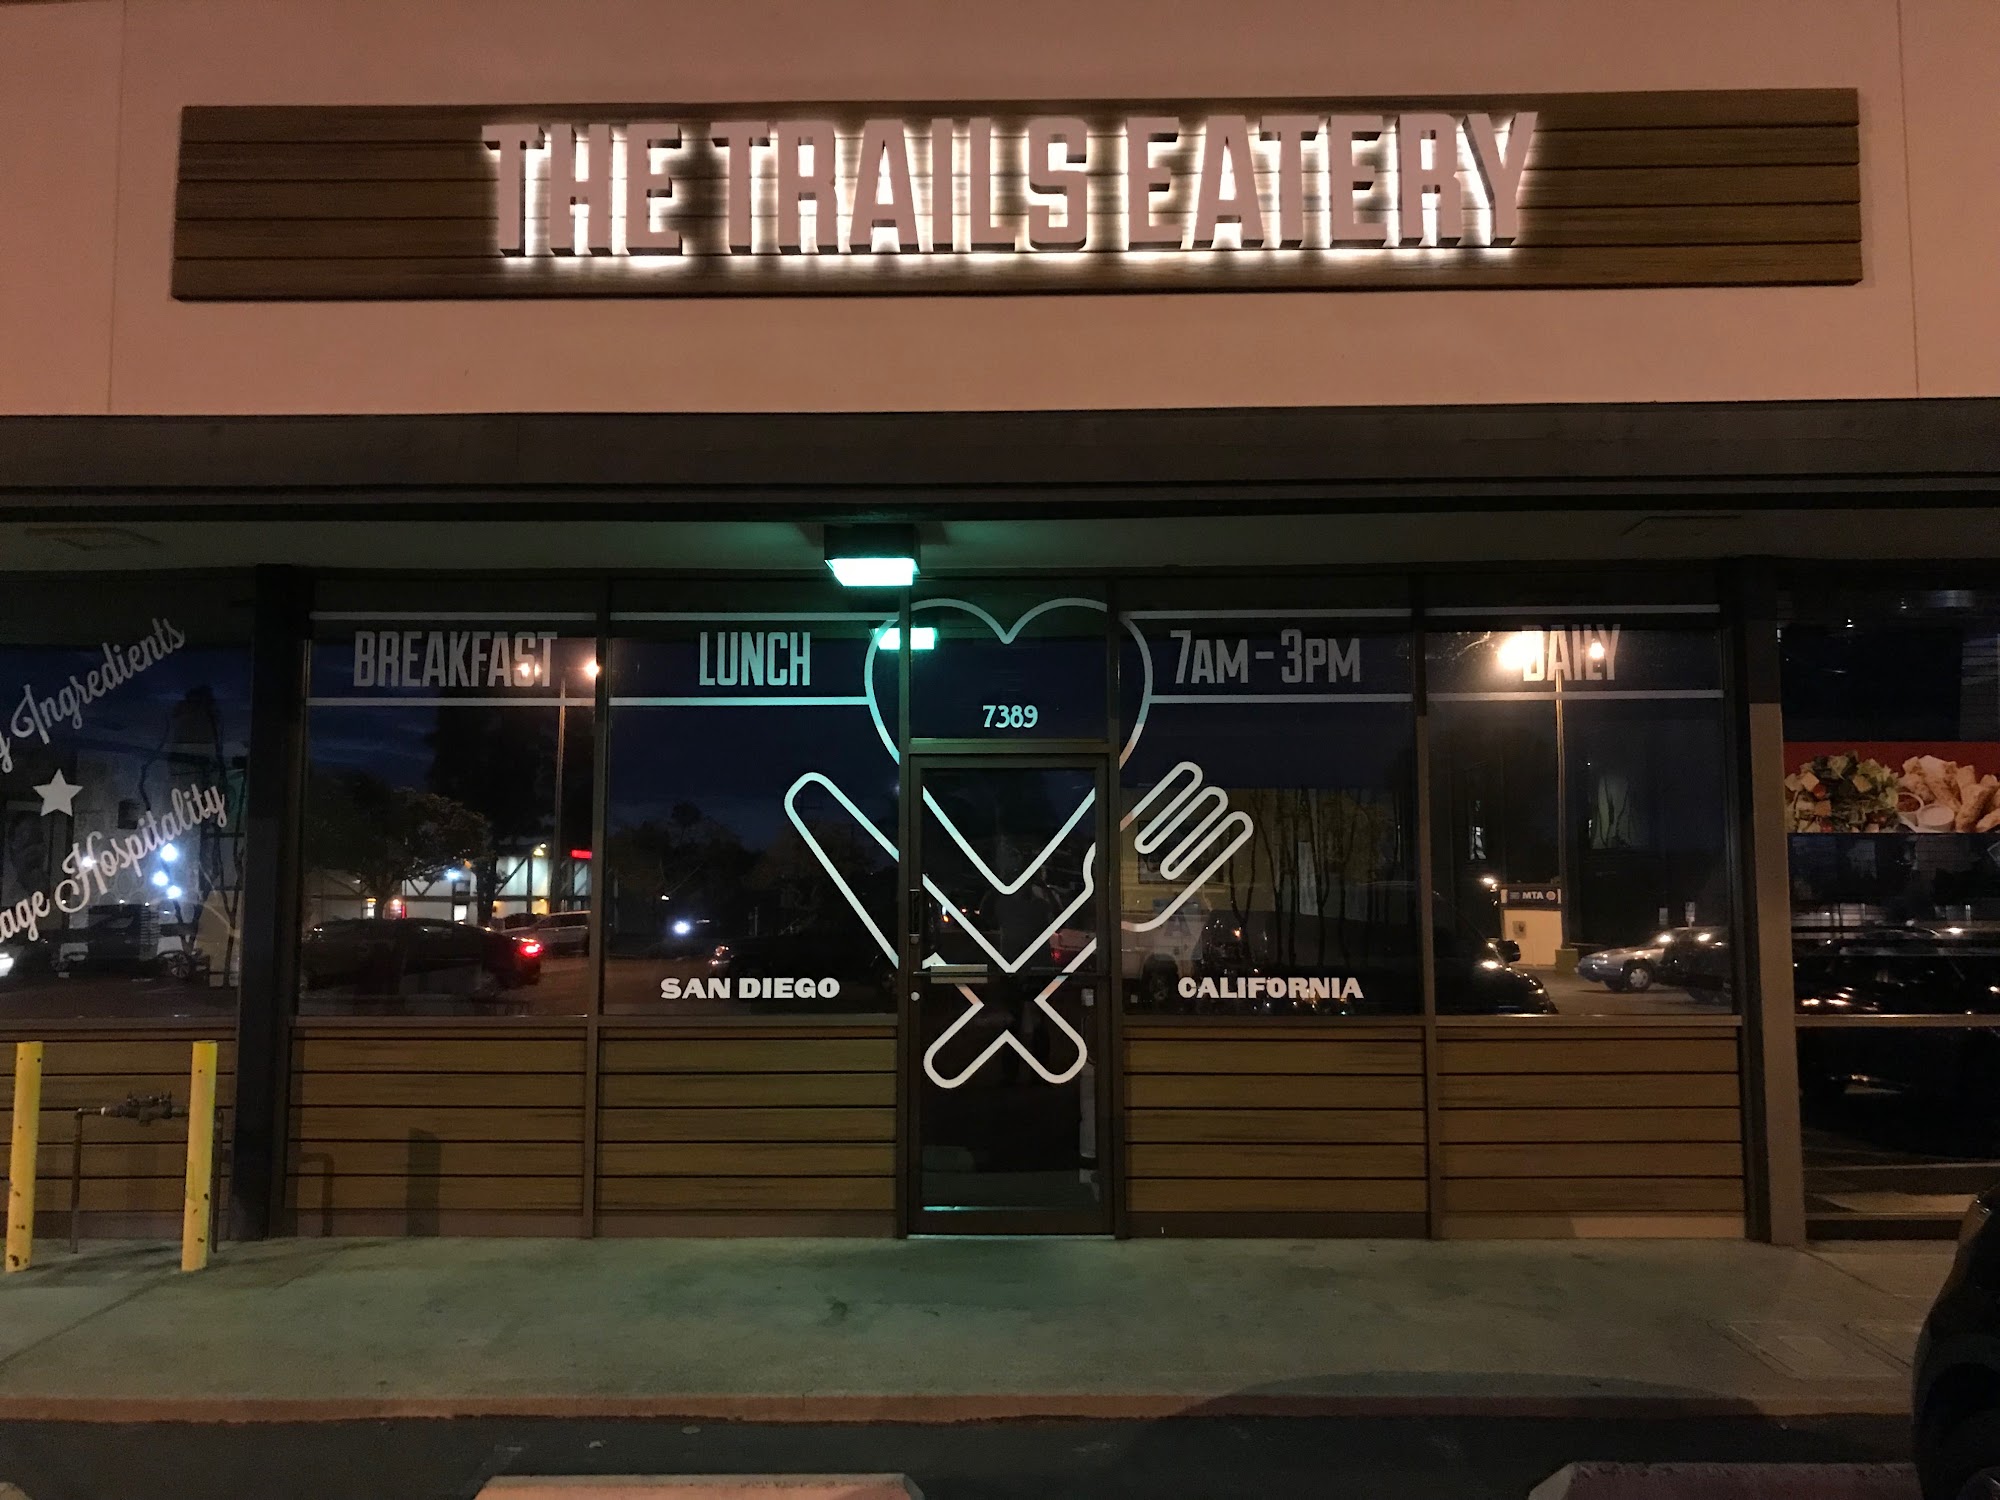 The Trails Eatery